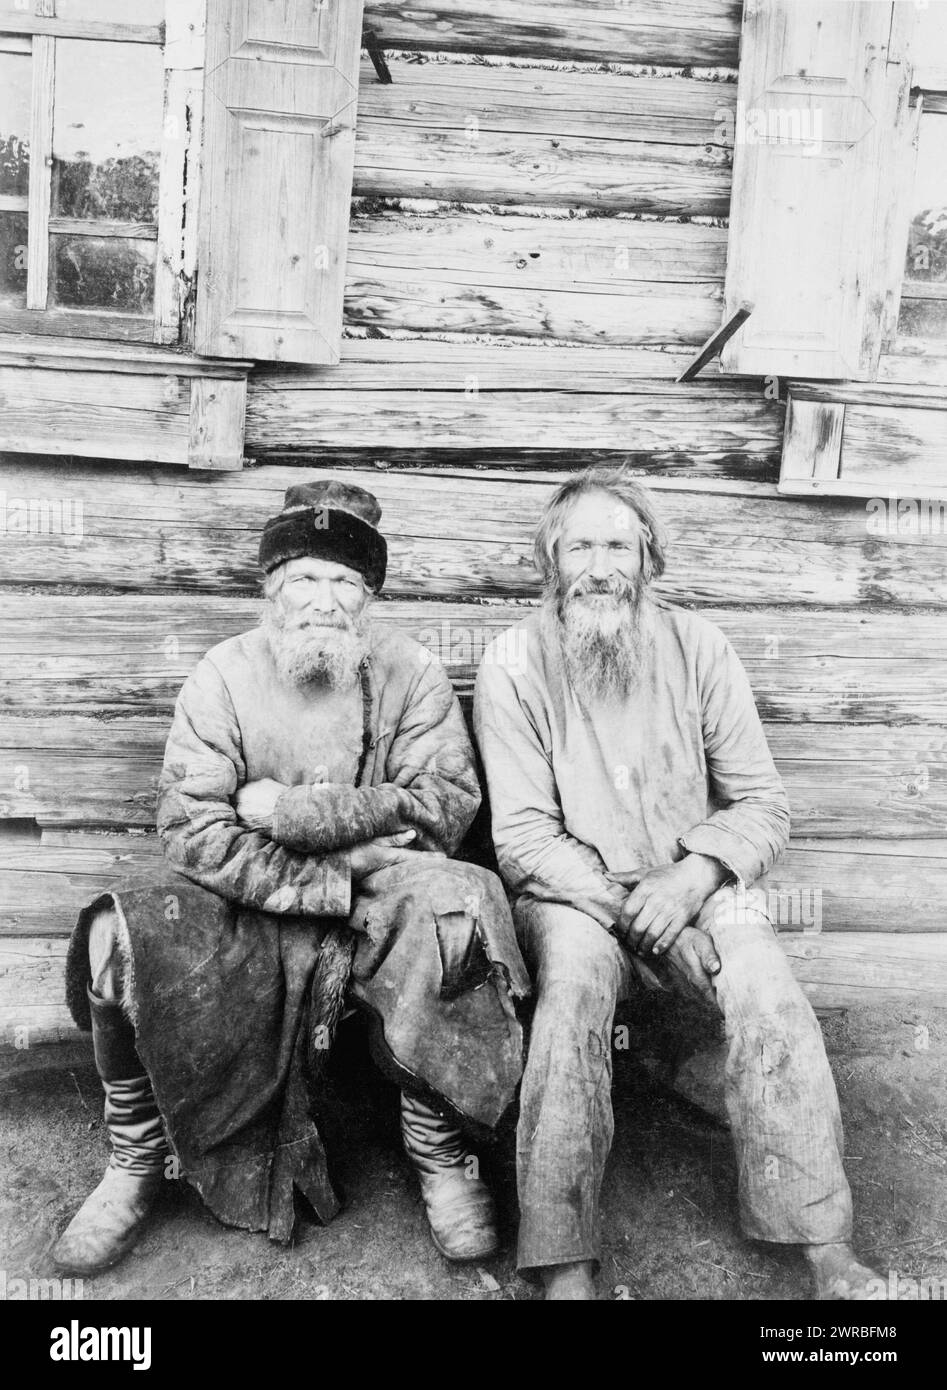 Two men seated, outside of log house, full-length, Russia, M. Dmitrievʹ., 1895?, Men, Clothing & dress, Russia, 1890-1900, Photographic prints, 1890-1900., Portrait photographs, 1890-1900, Photographic prints, 1890-1900, 1 photographic print Stock Photo